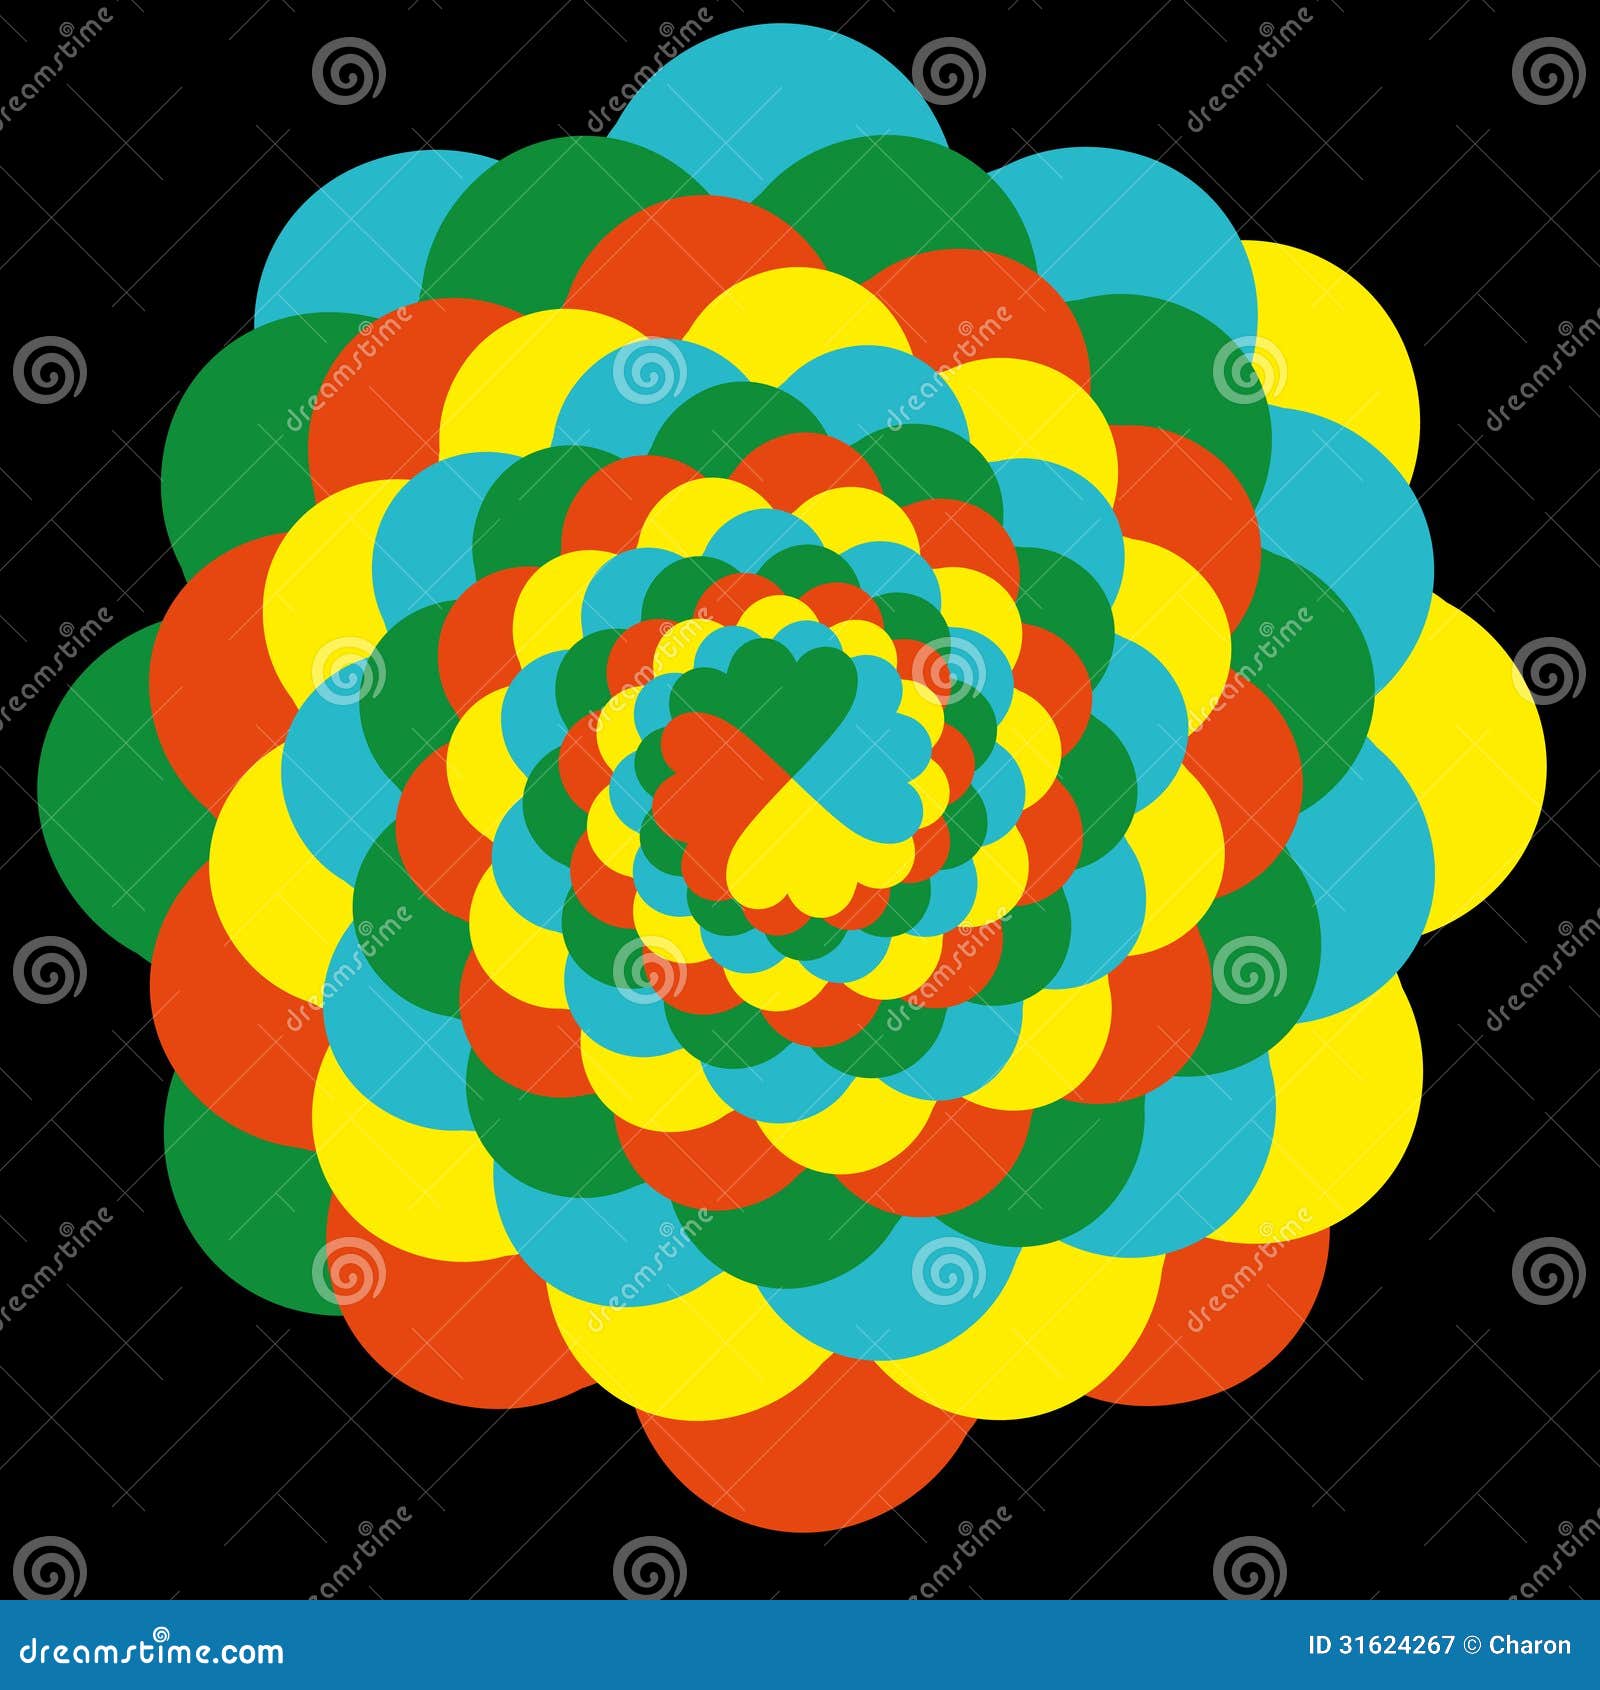 flower-swirl-sweet-colorful-pattern-isolated-spinning-beautiful-bright-color-petals-spiral-clover-31624267.jpg